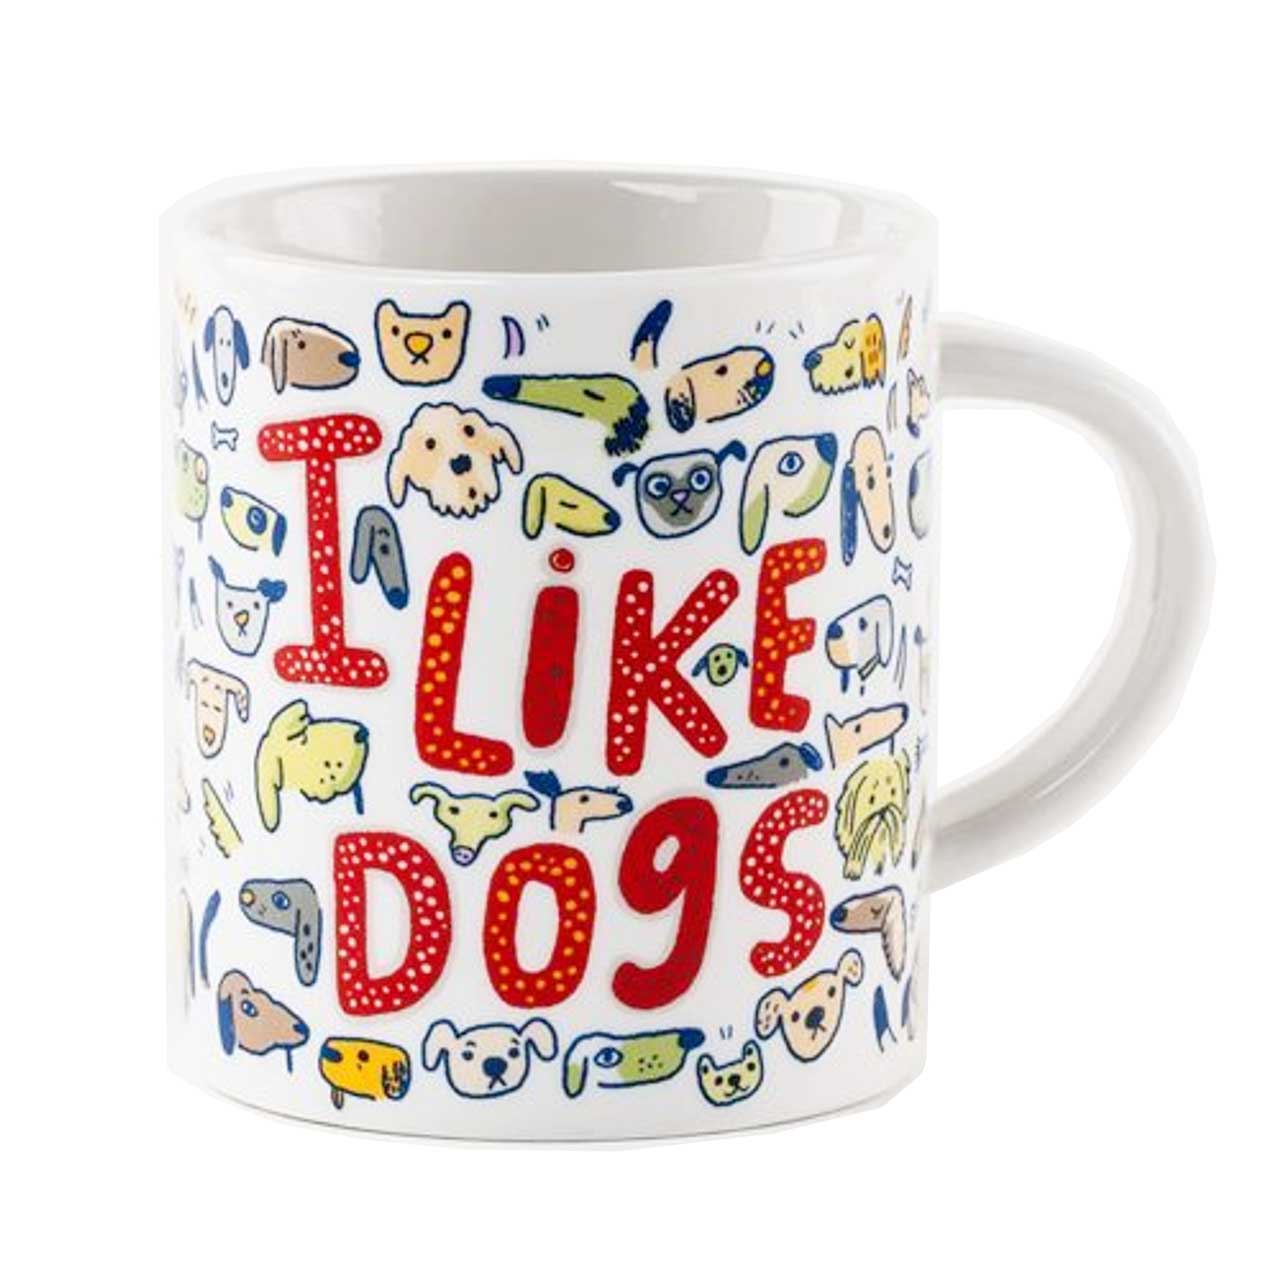 White ceramic Mug showing illustrations of cute dogs and the caption "I Like Dogs" in red.